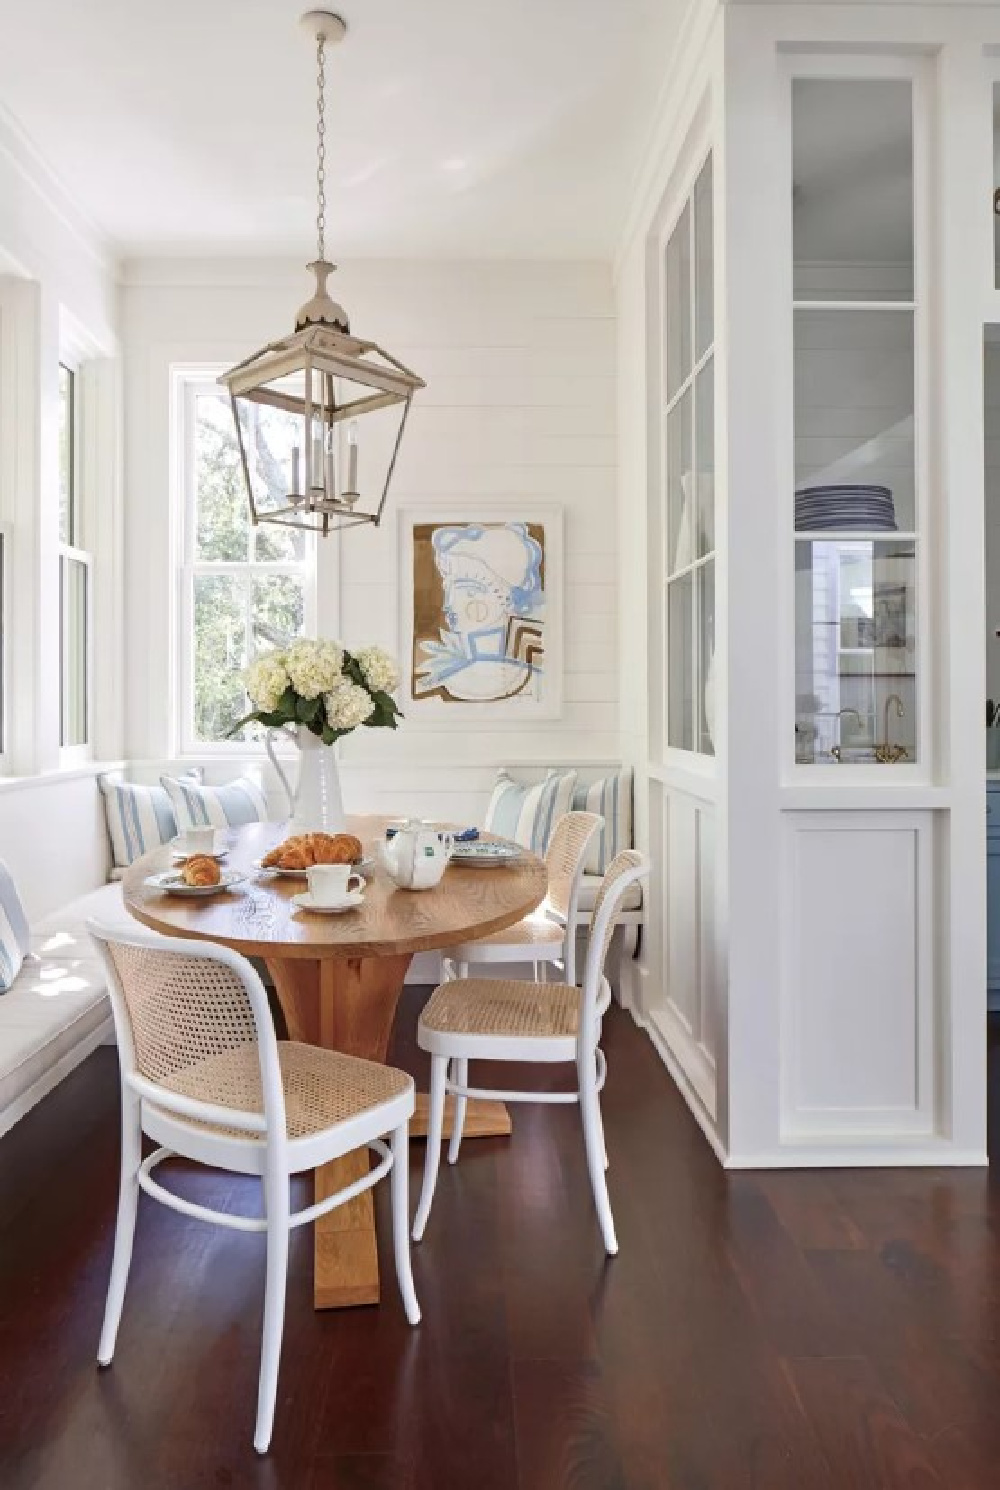 Beautiful breakfast nook with banquette and custom oval table - Julia Berolzheimer's home in Southern Living (photo: Hector Manuel Sanchez). #charlestonhomes #breakfastnooks